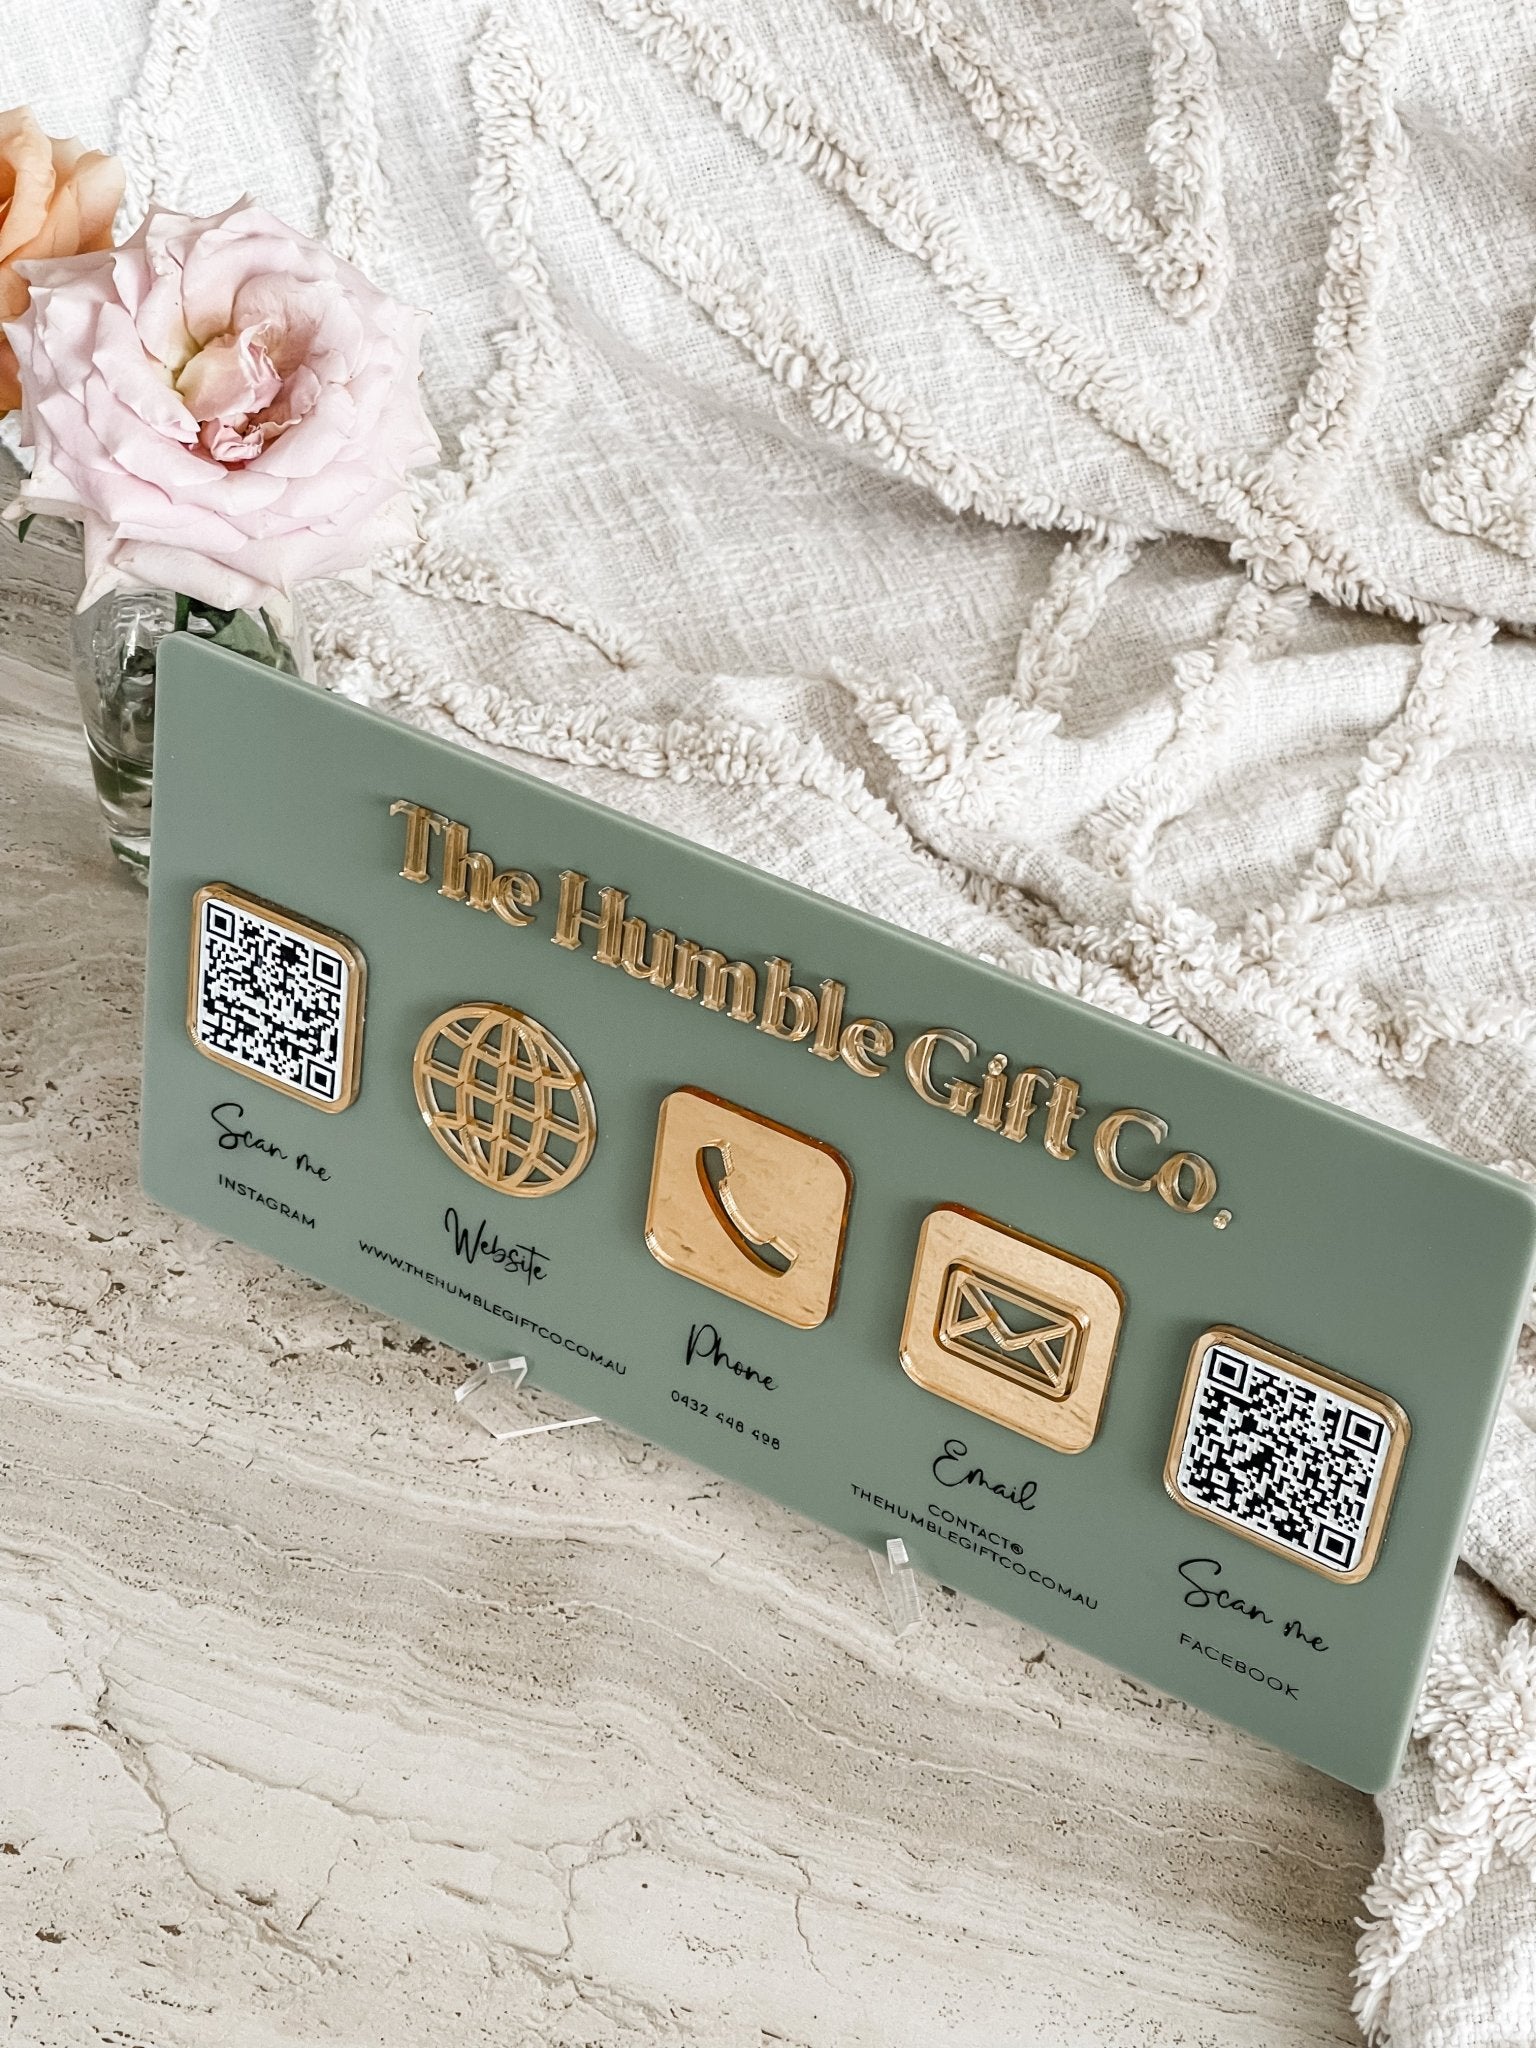 Social Media Sign - The Humble Gift Co.